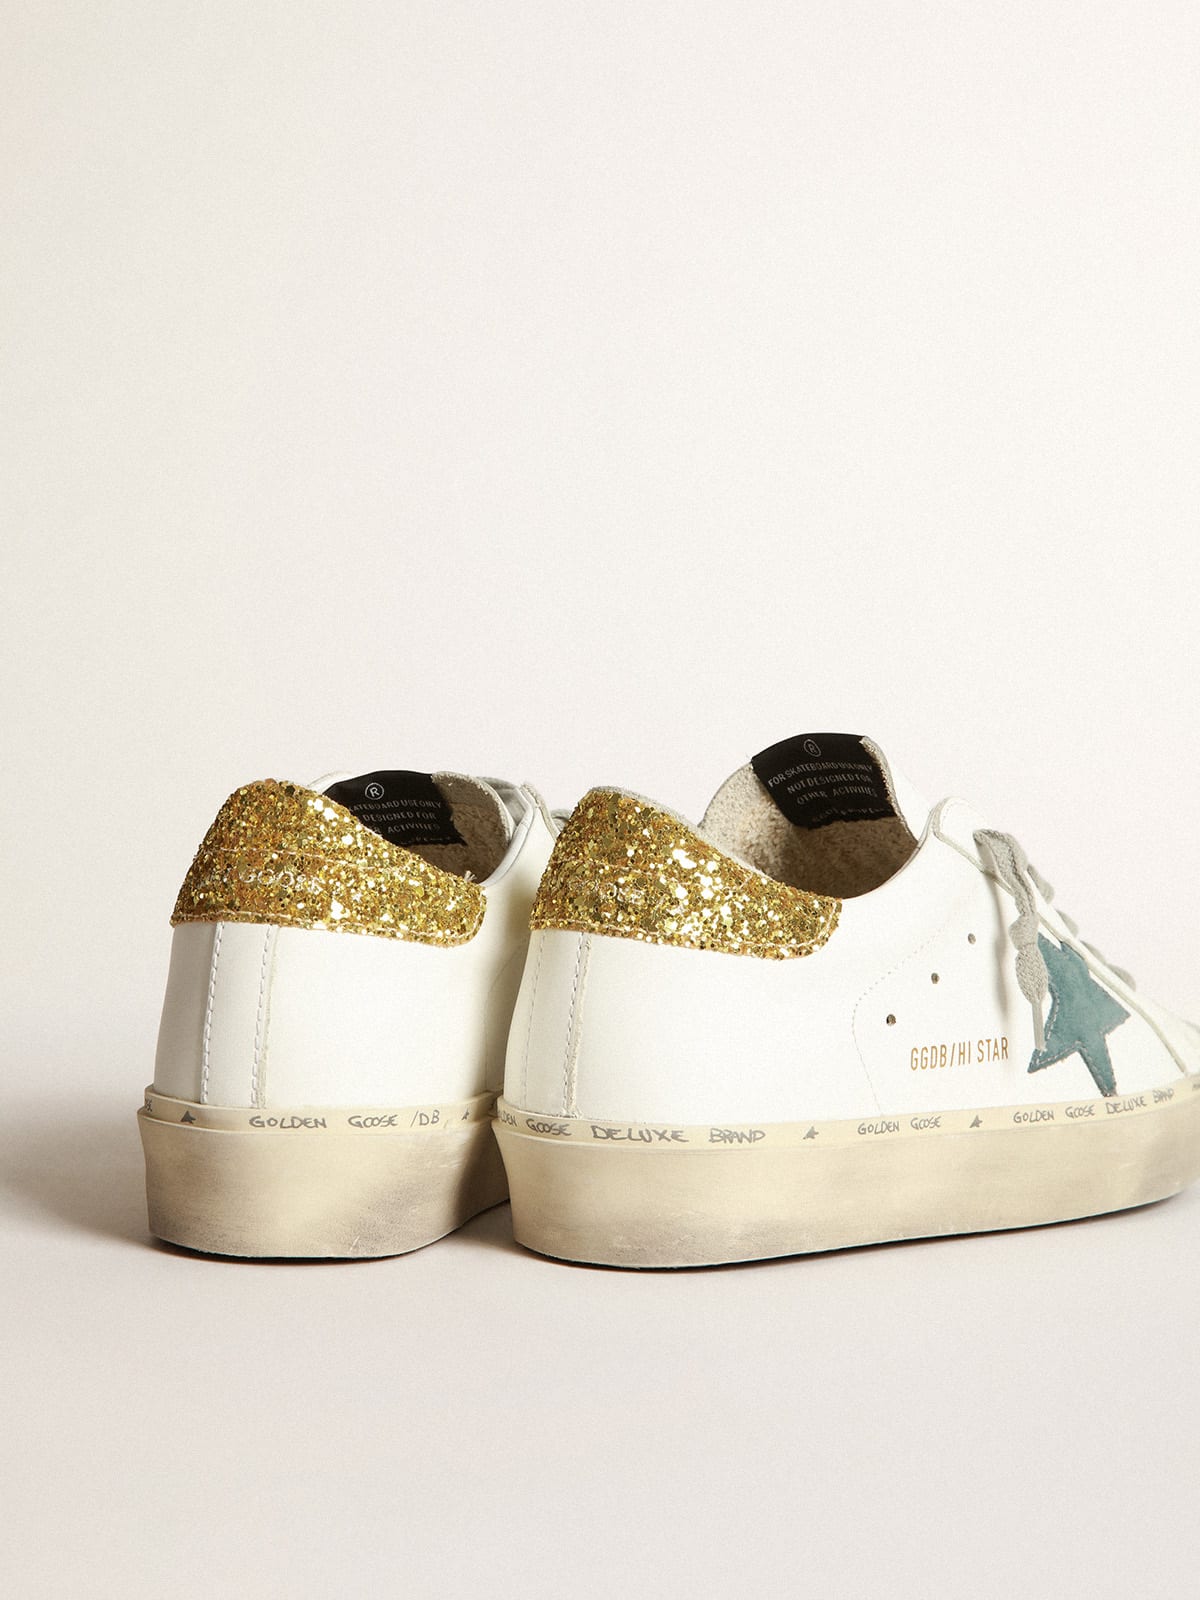 Golden Goose - Hi Star sneakers with petrol-blue suede star and gold glitter heel tab in 